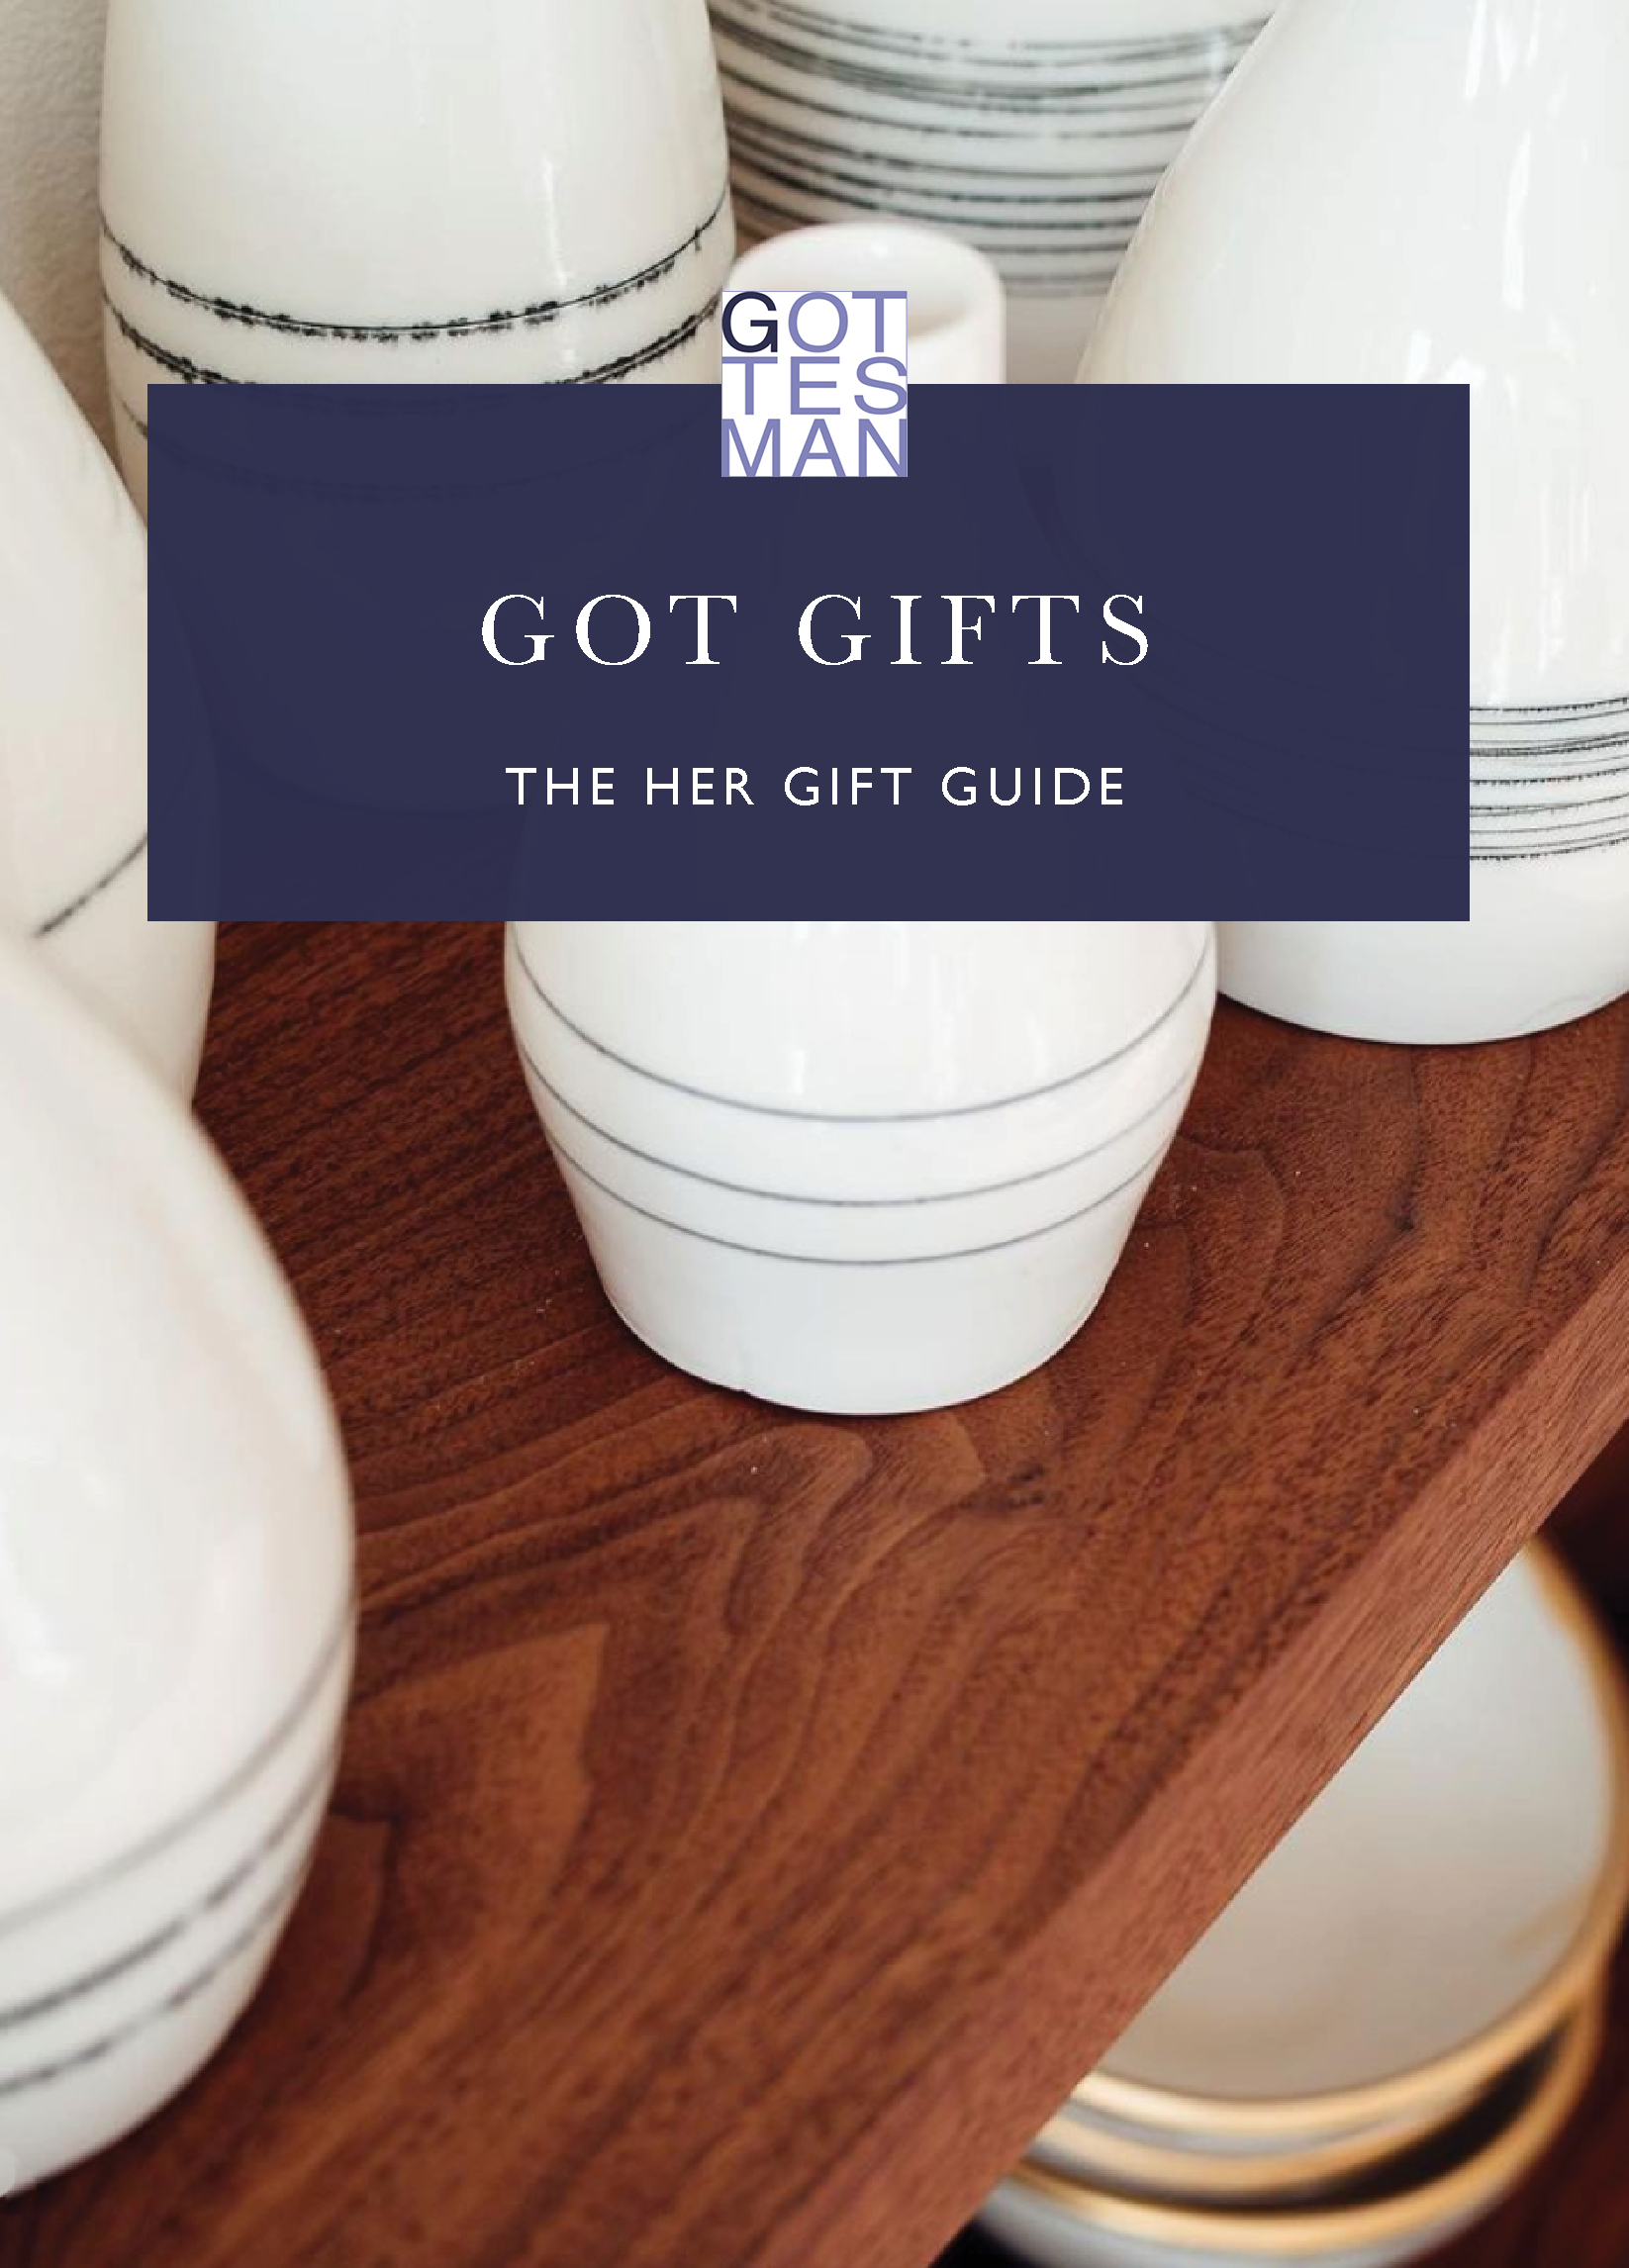 "Got Gifts: The Her Gift Guide"